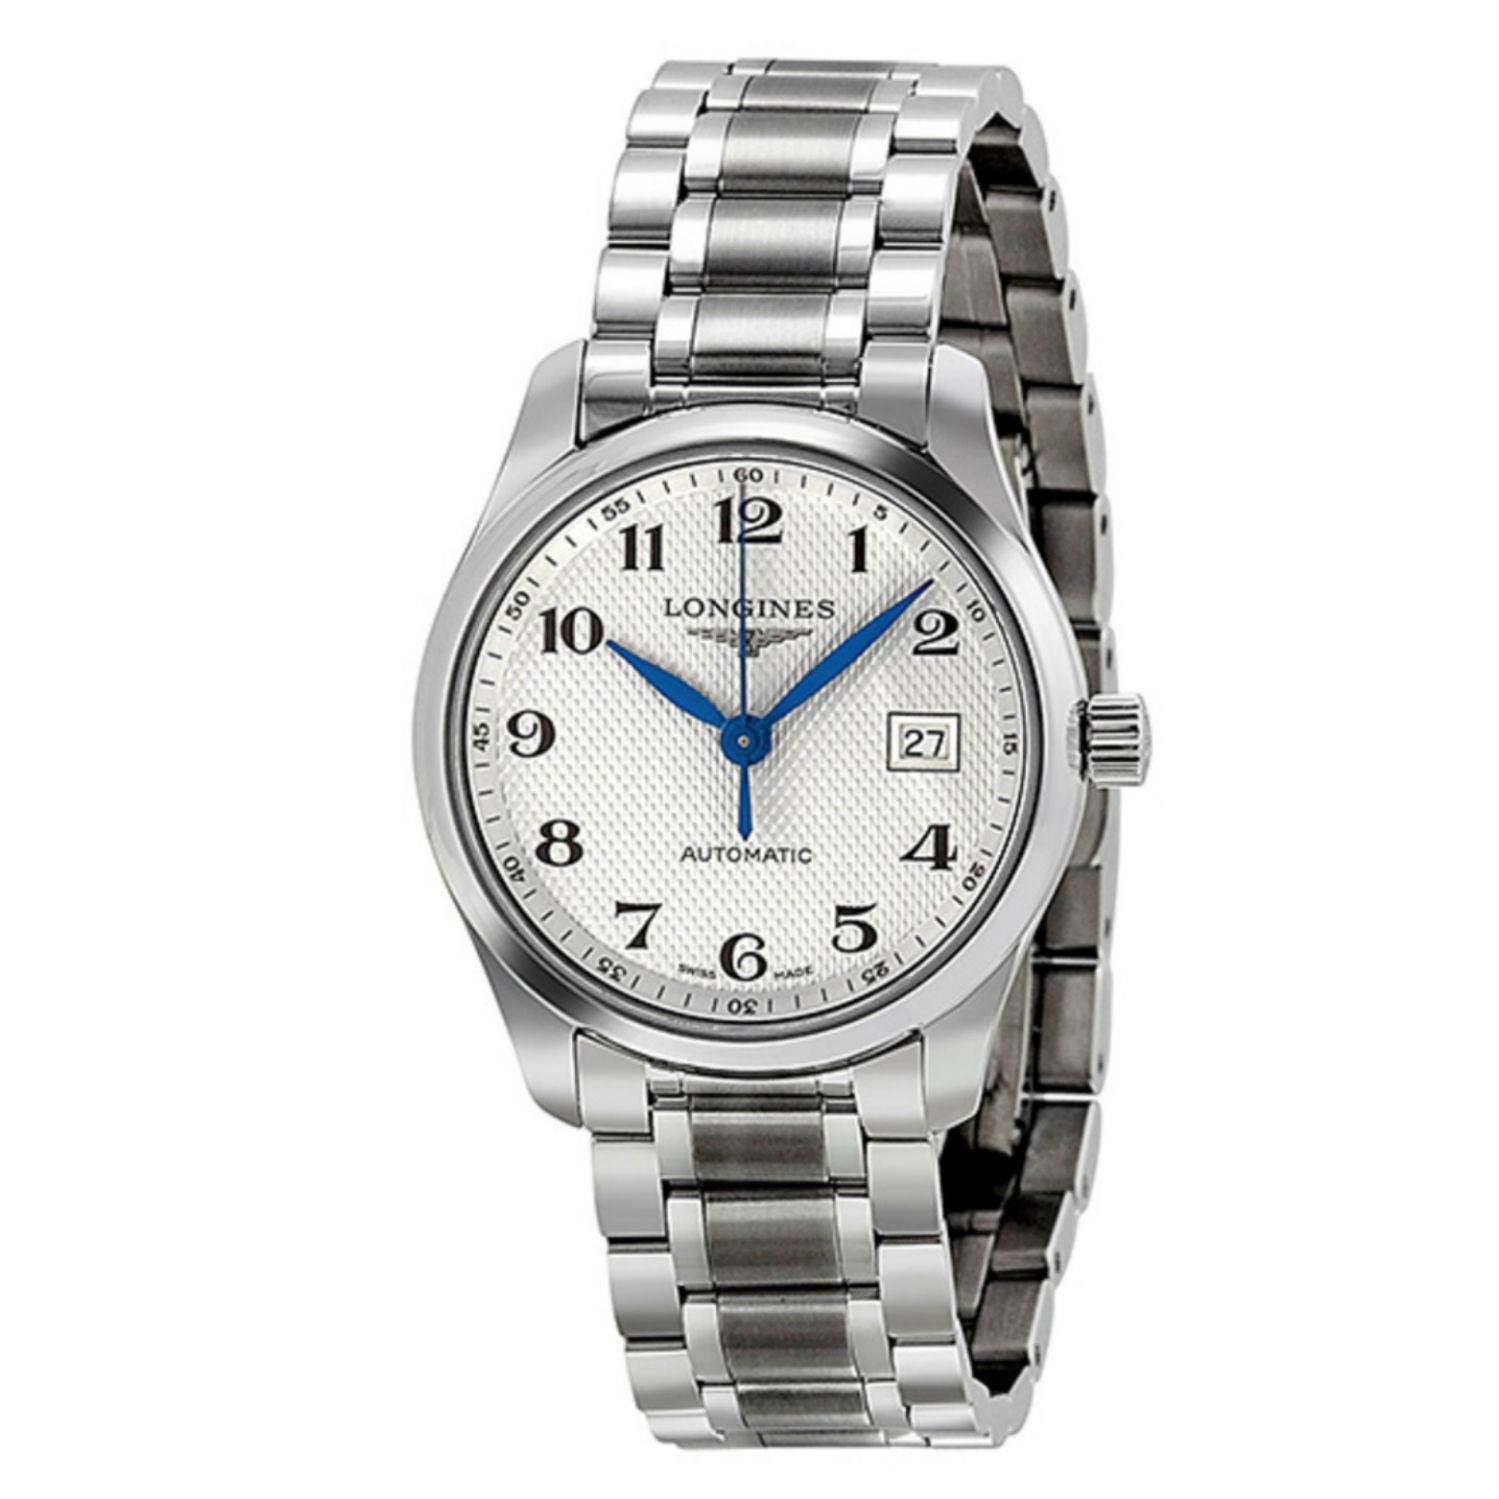 Longines Master Collection Automatic White Dial Stainless Steel Ladies Watch L22574786